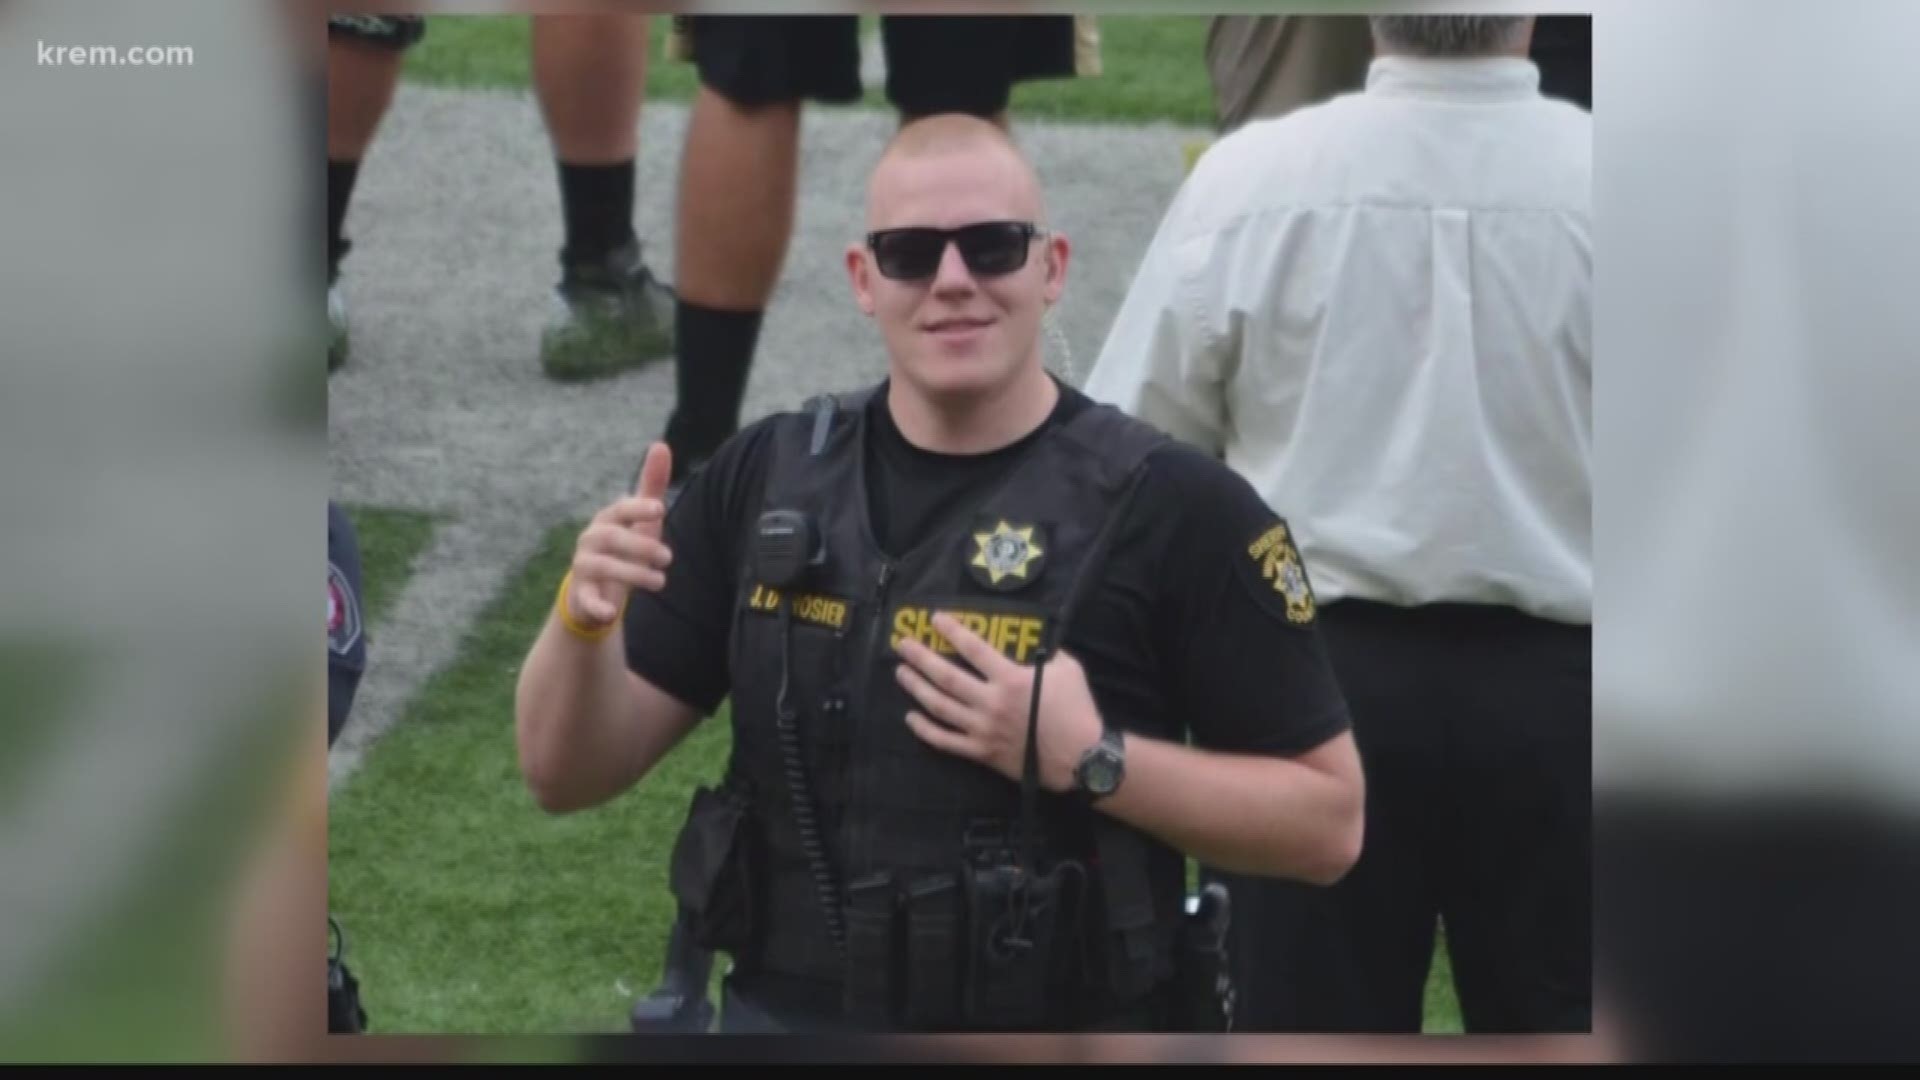 A memorial has been planned for Cowlitz County Sheriff's deputy Justin DeRosier, who was killed in the line of duty.